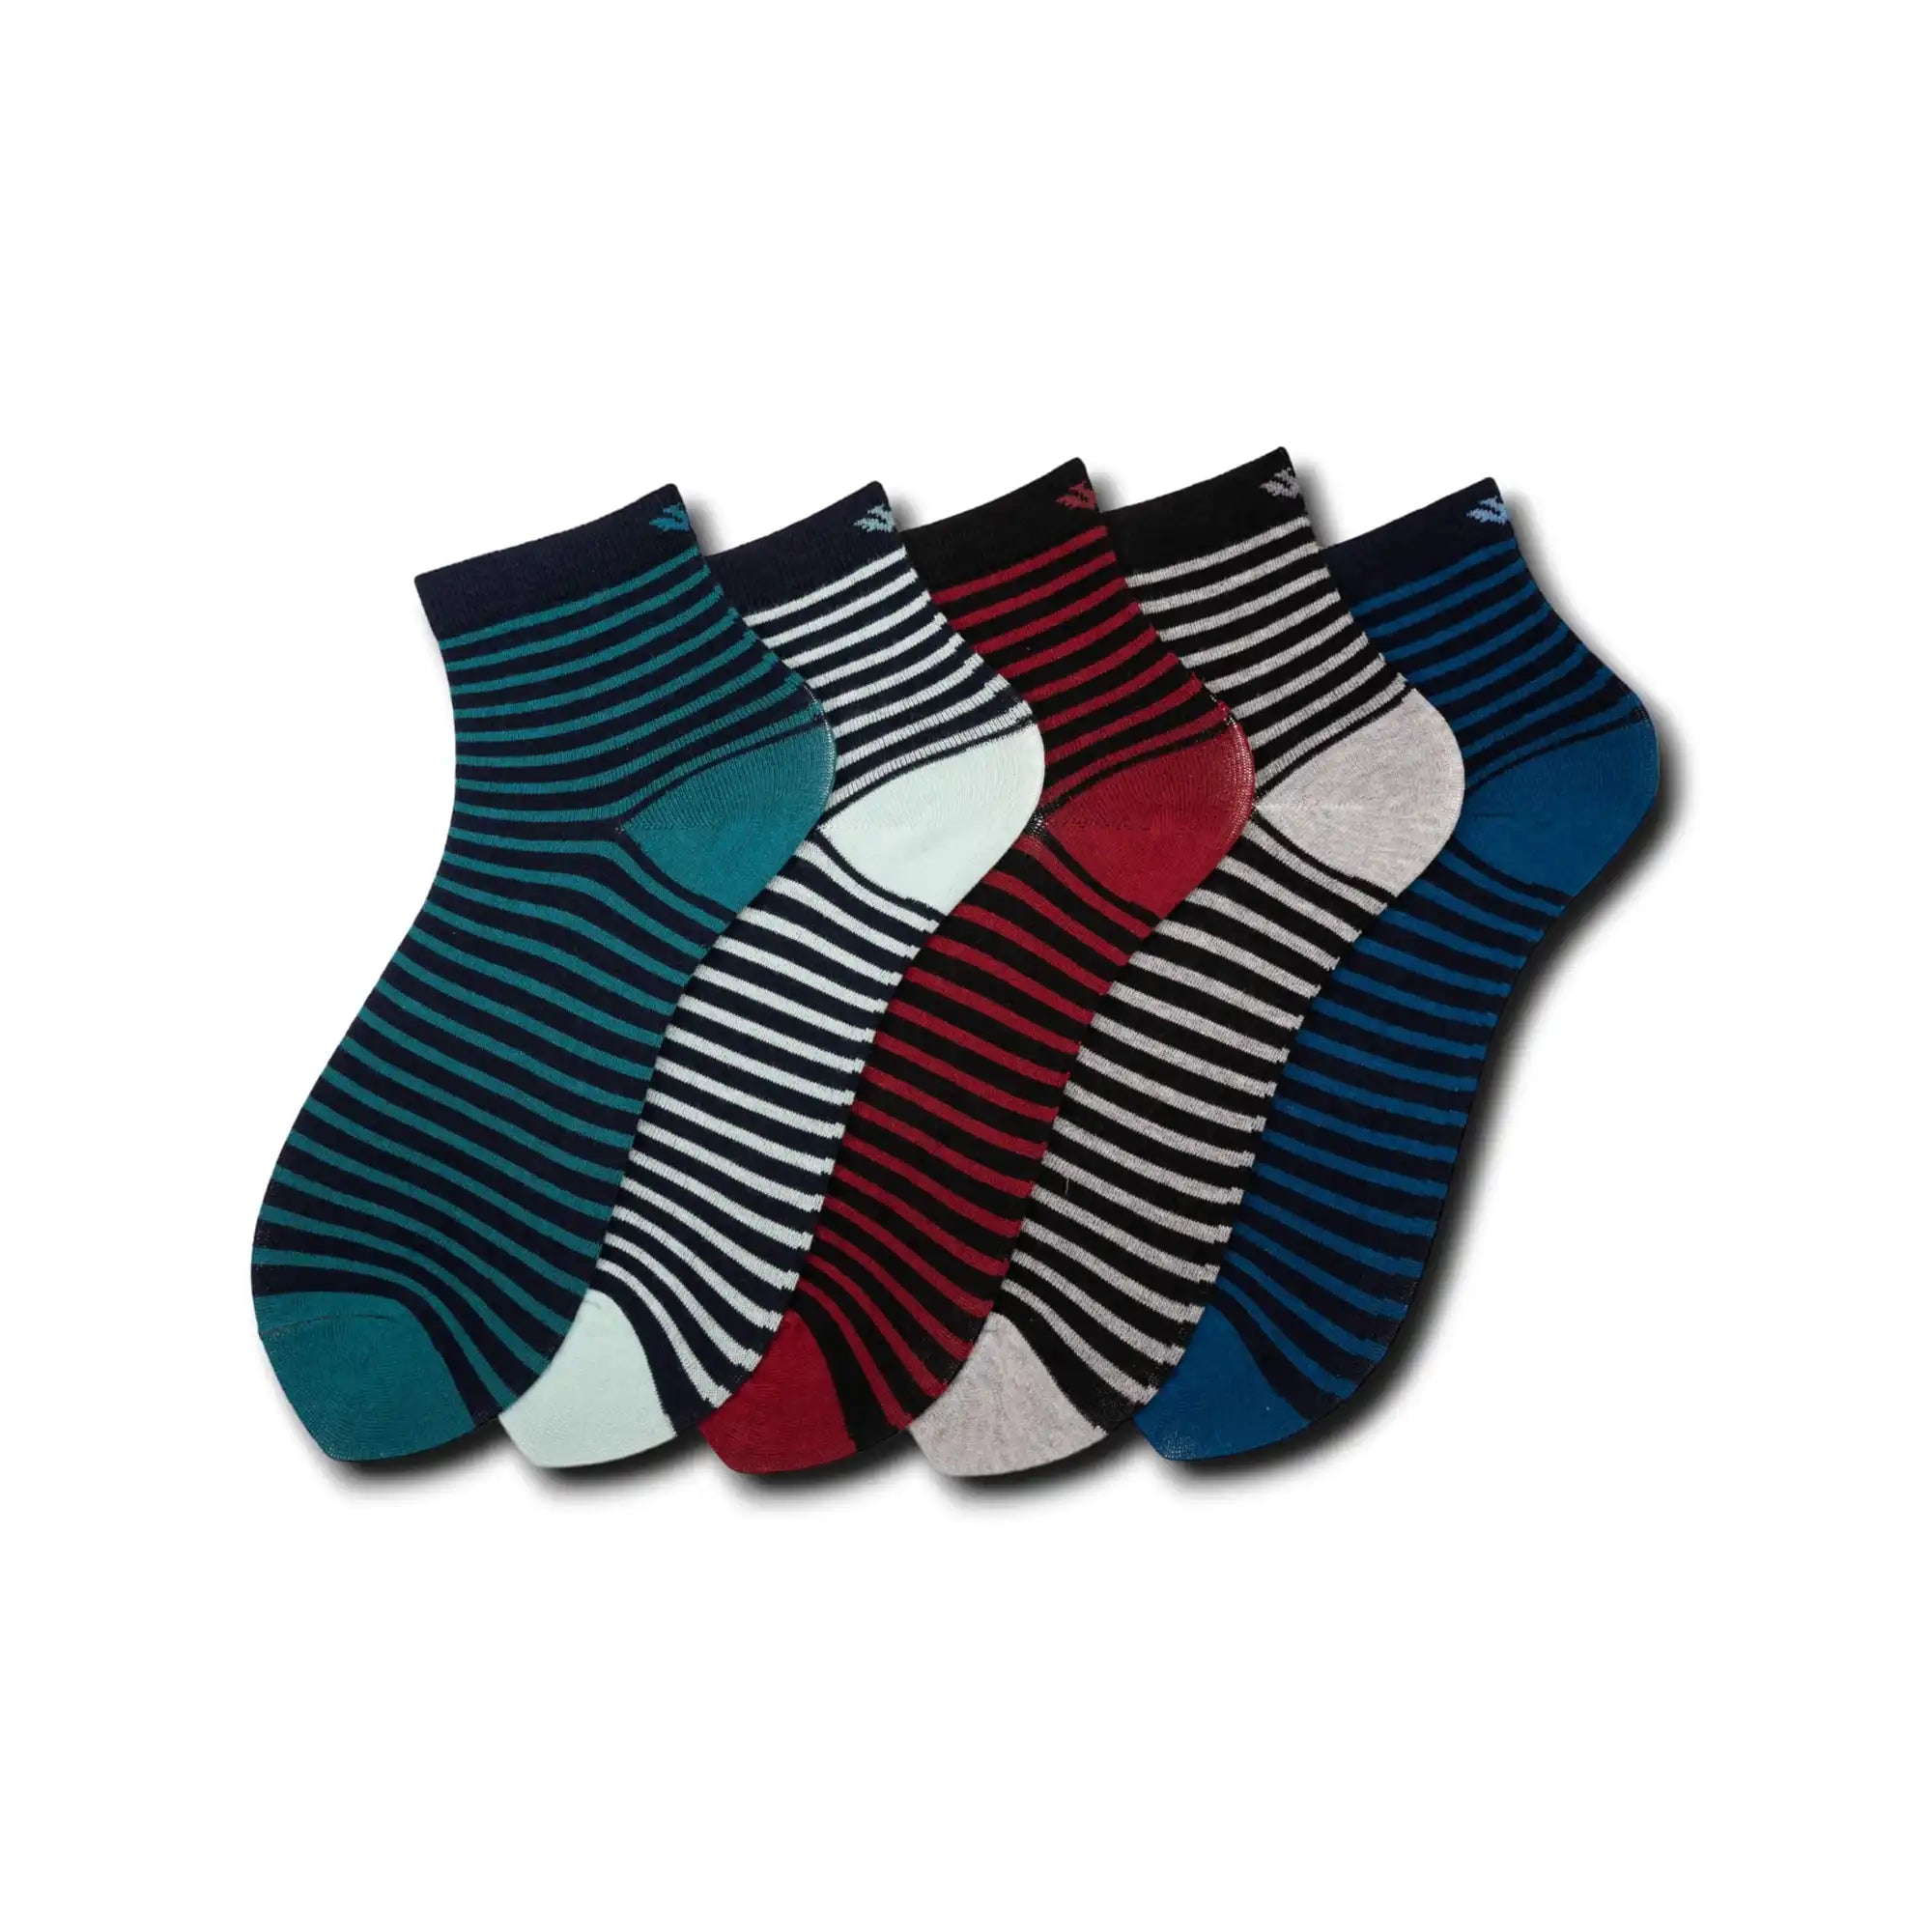 Young Wings Men's Multi Colour Cotton Fabric Design Ankle Length Socks - Pack of 5, Style no. 2732-M1